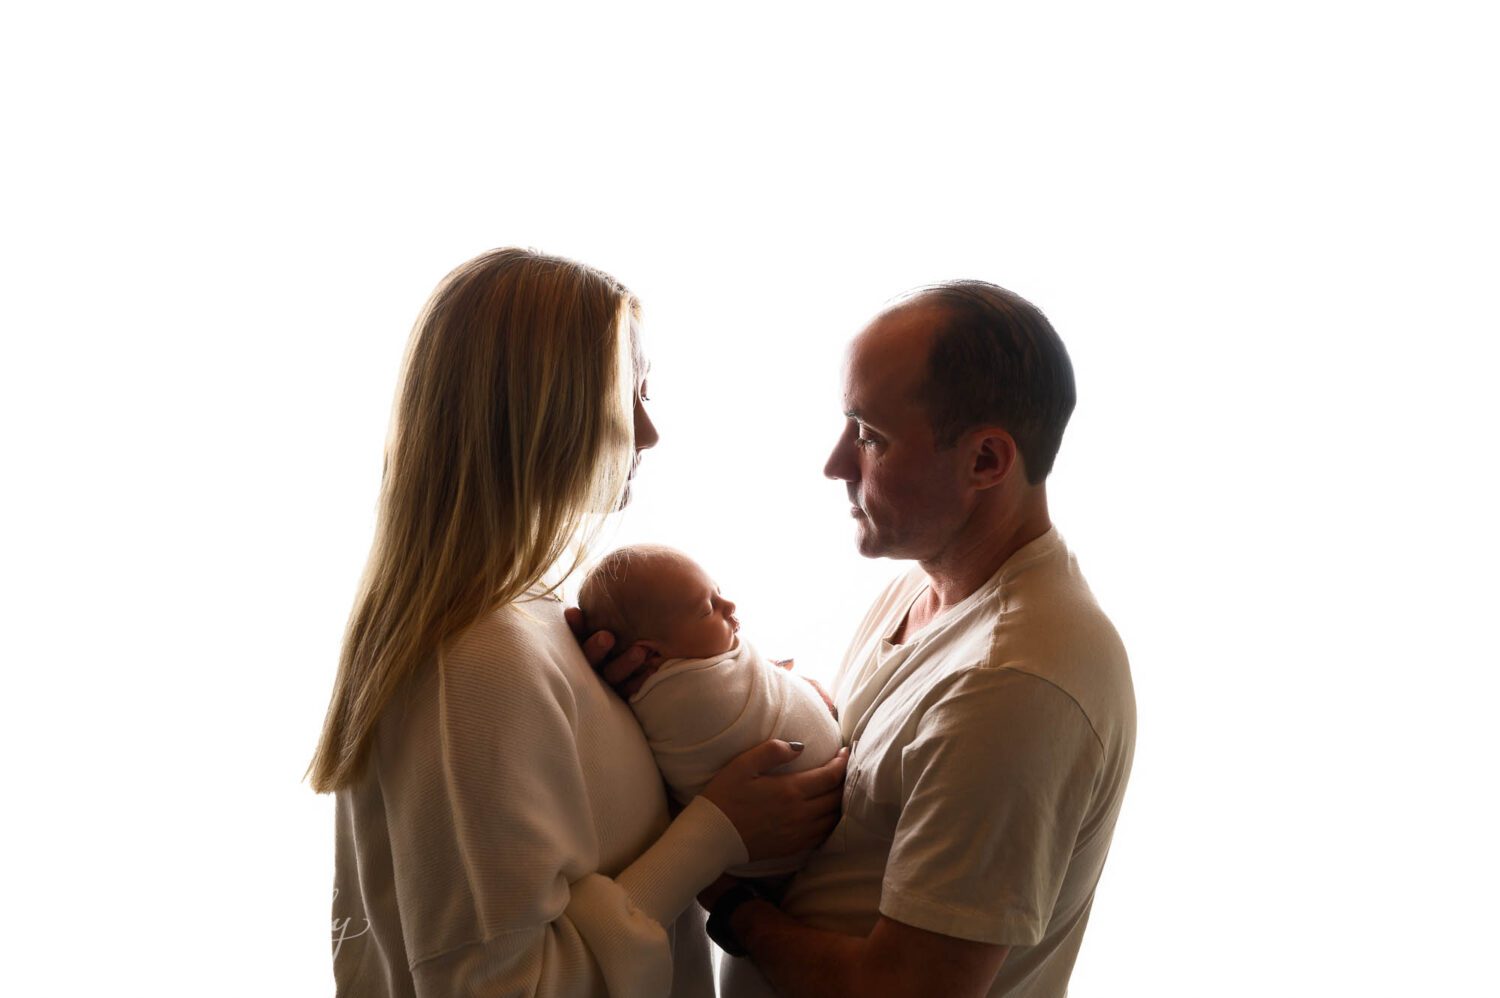 A new family of three pose for their bridgeport ct newborn photography session. 